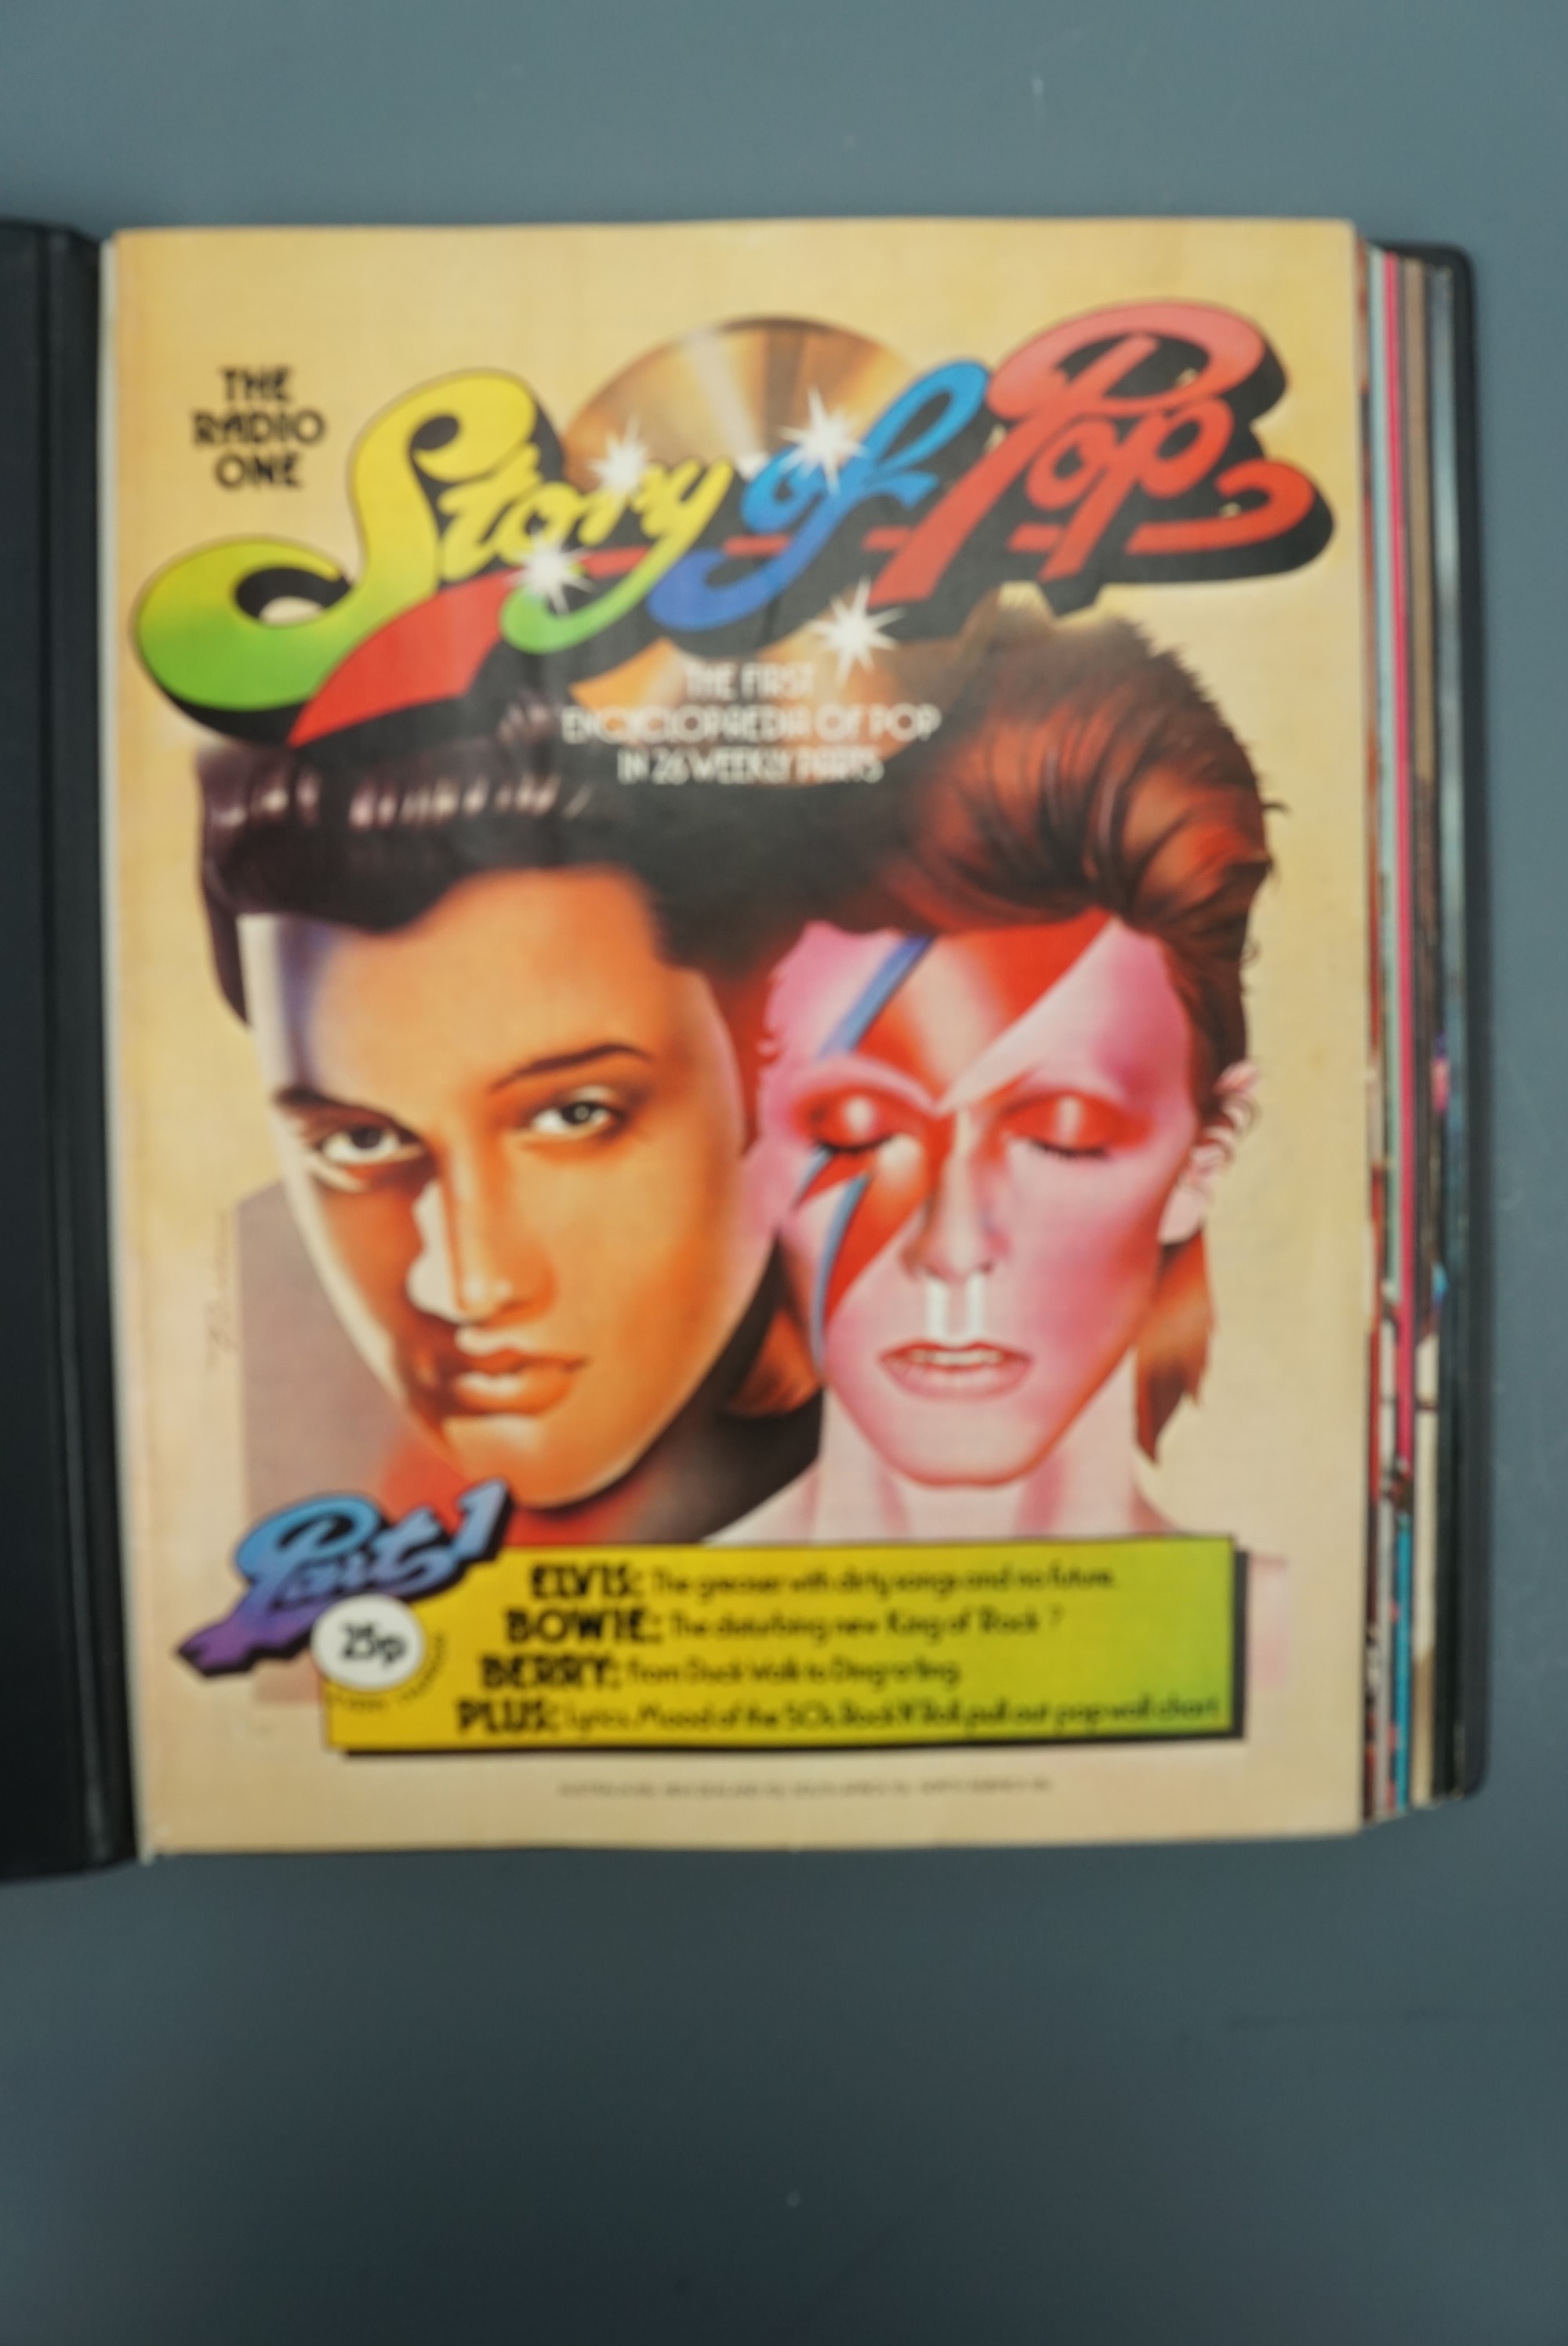 A set of the 1973 Radio One magazine "The Story Of Pop" in original binders - Image 4 of 4